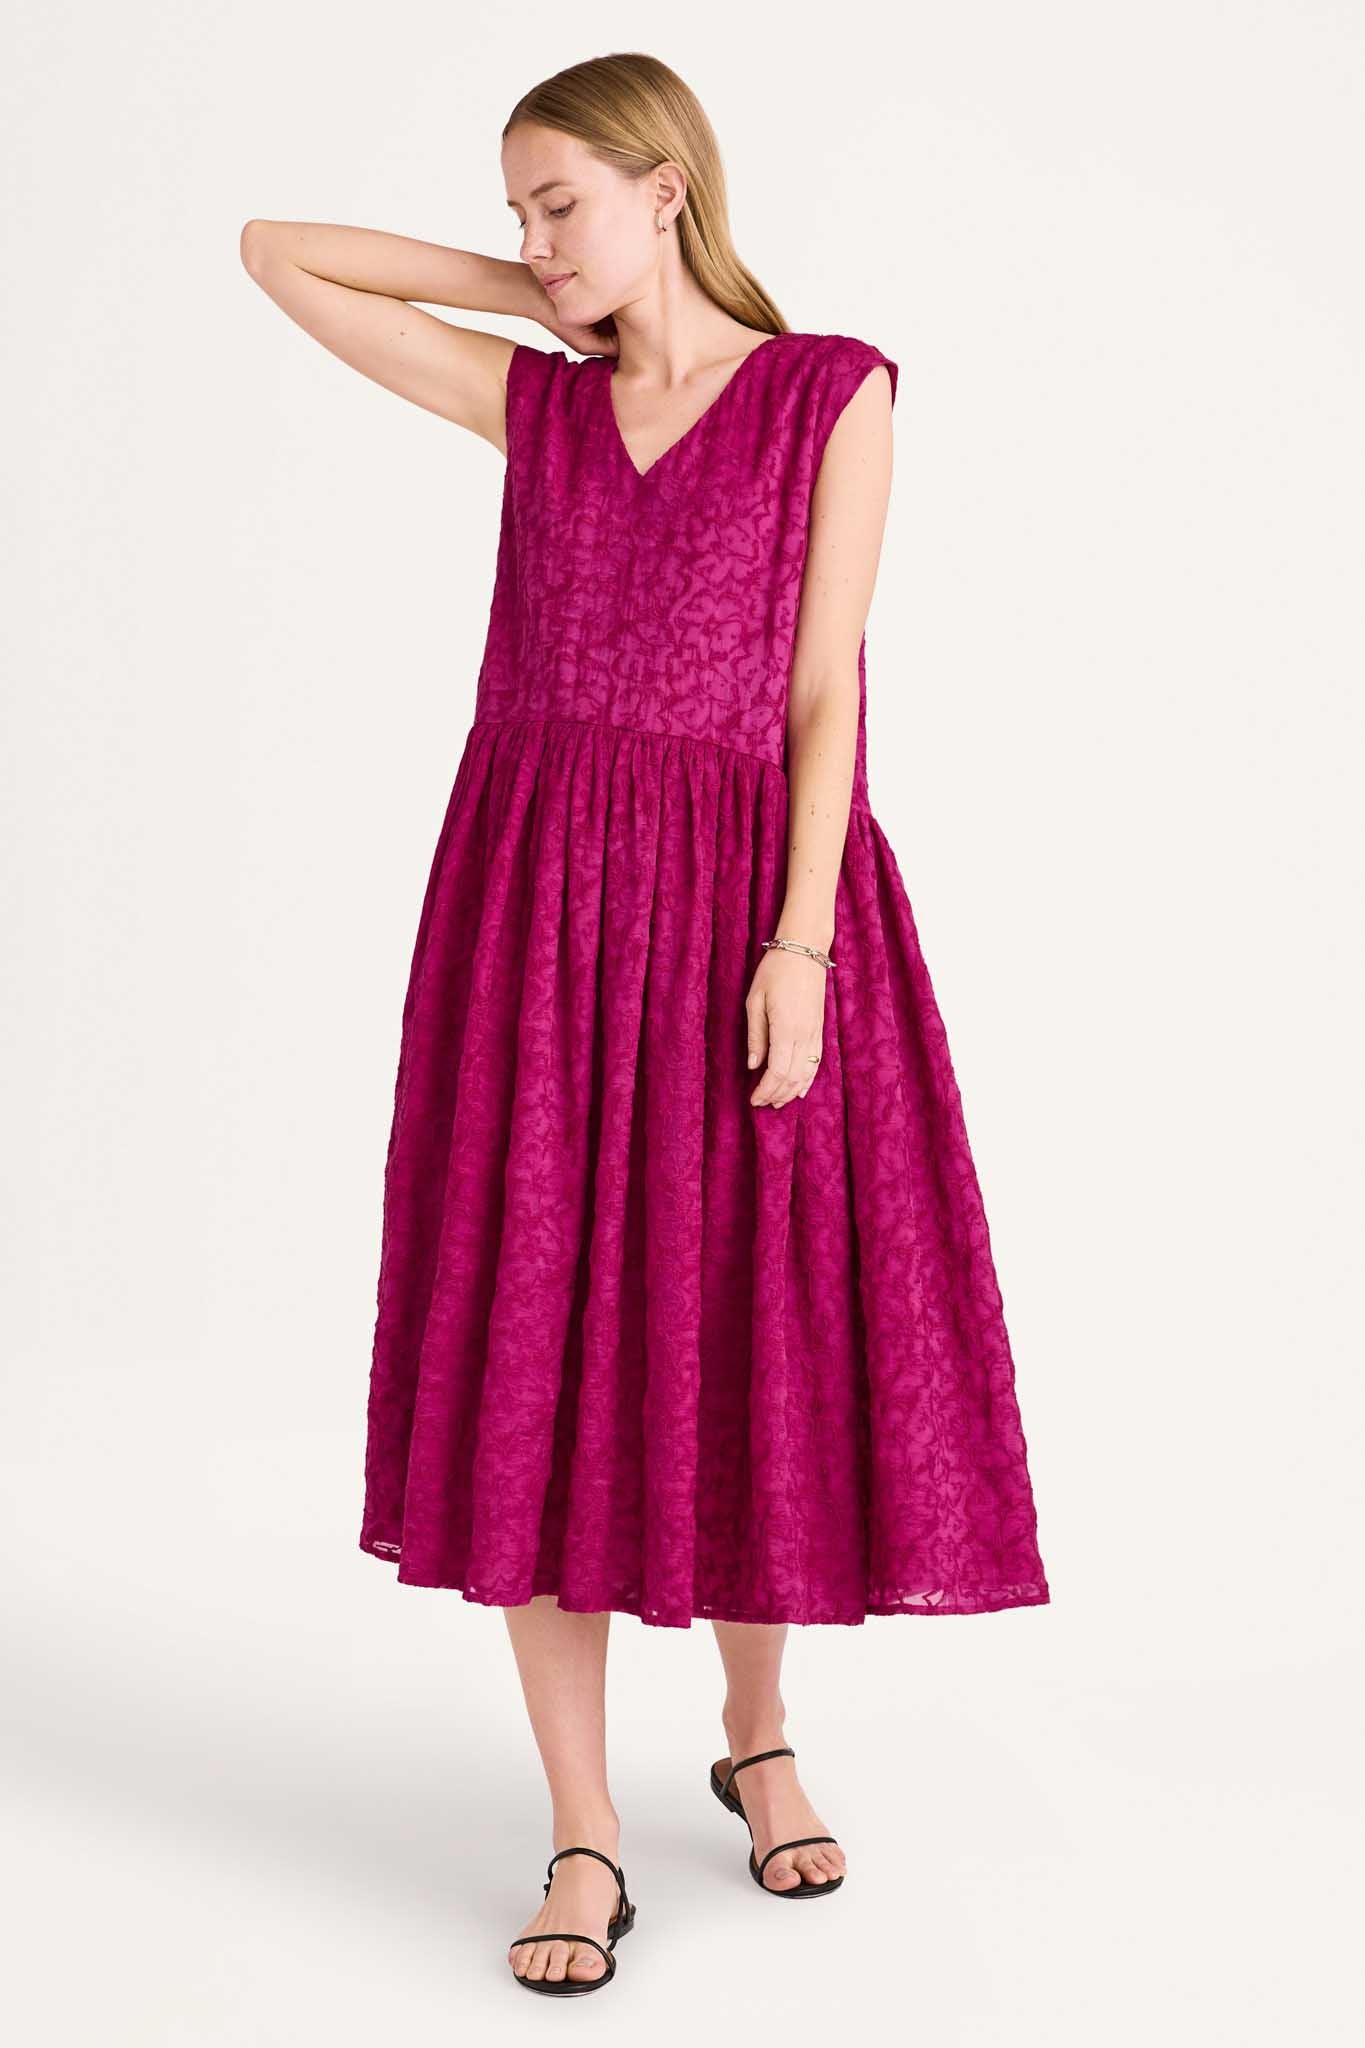 Willow Dress in Orchid – Merlette